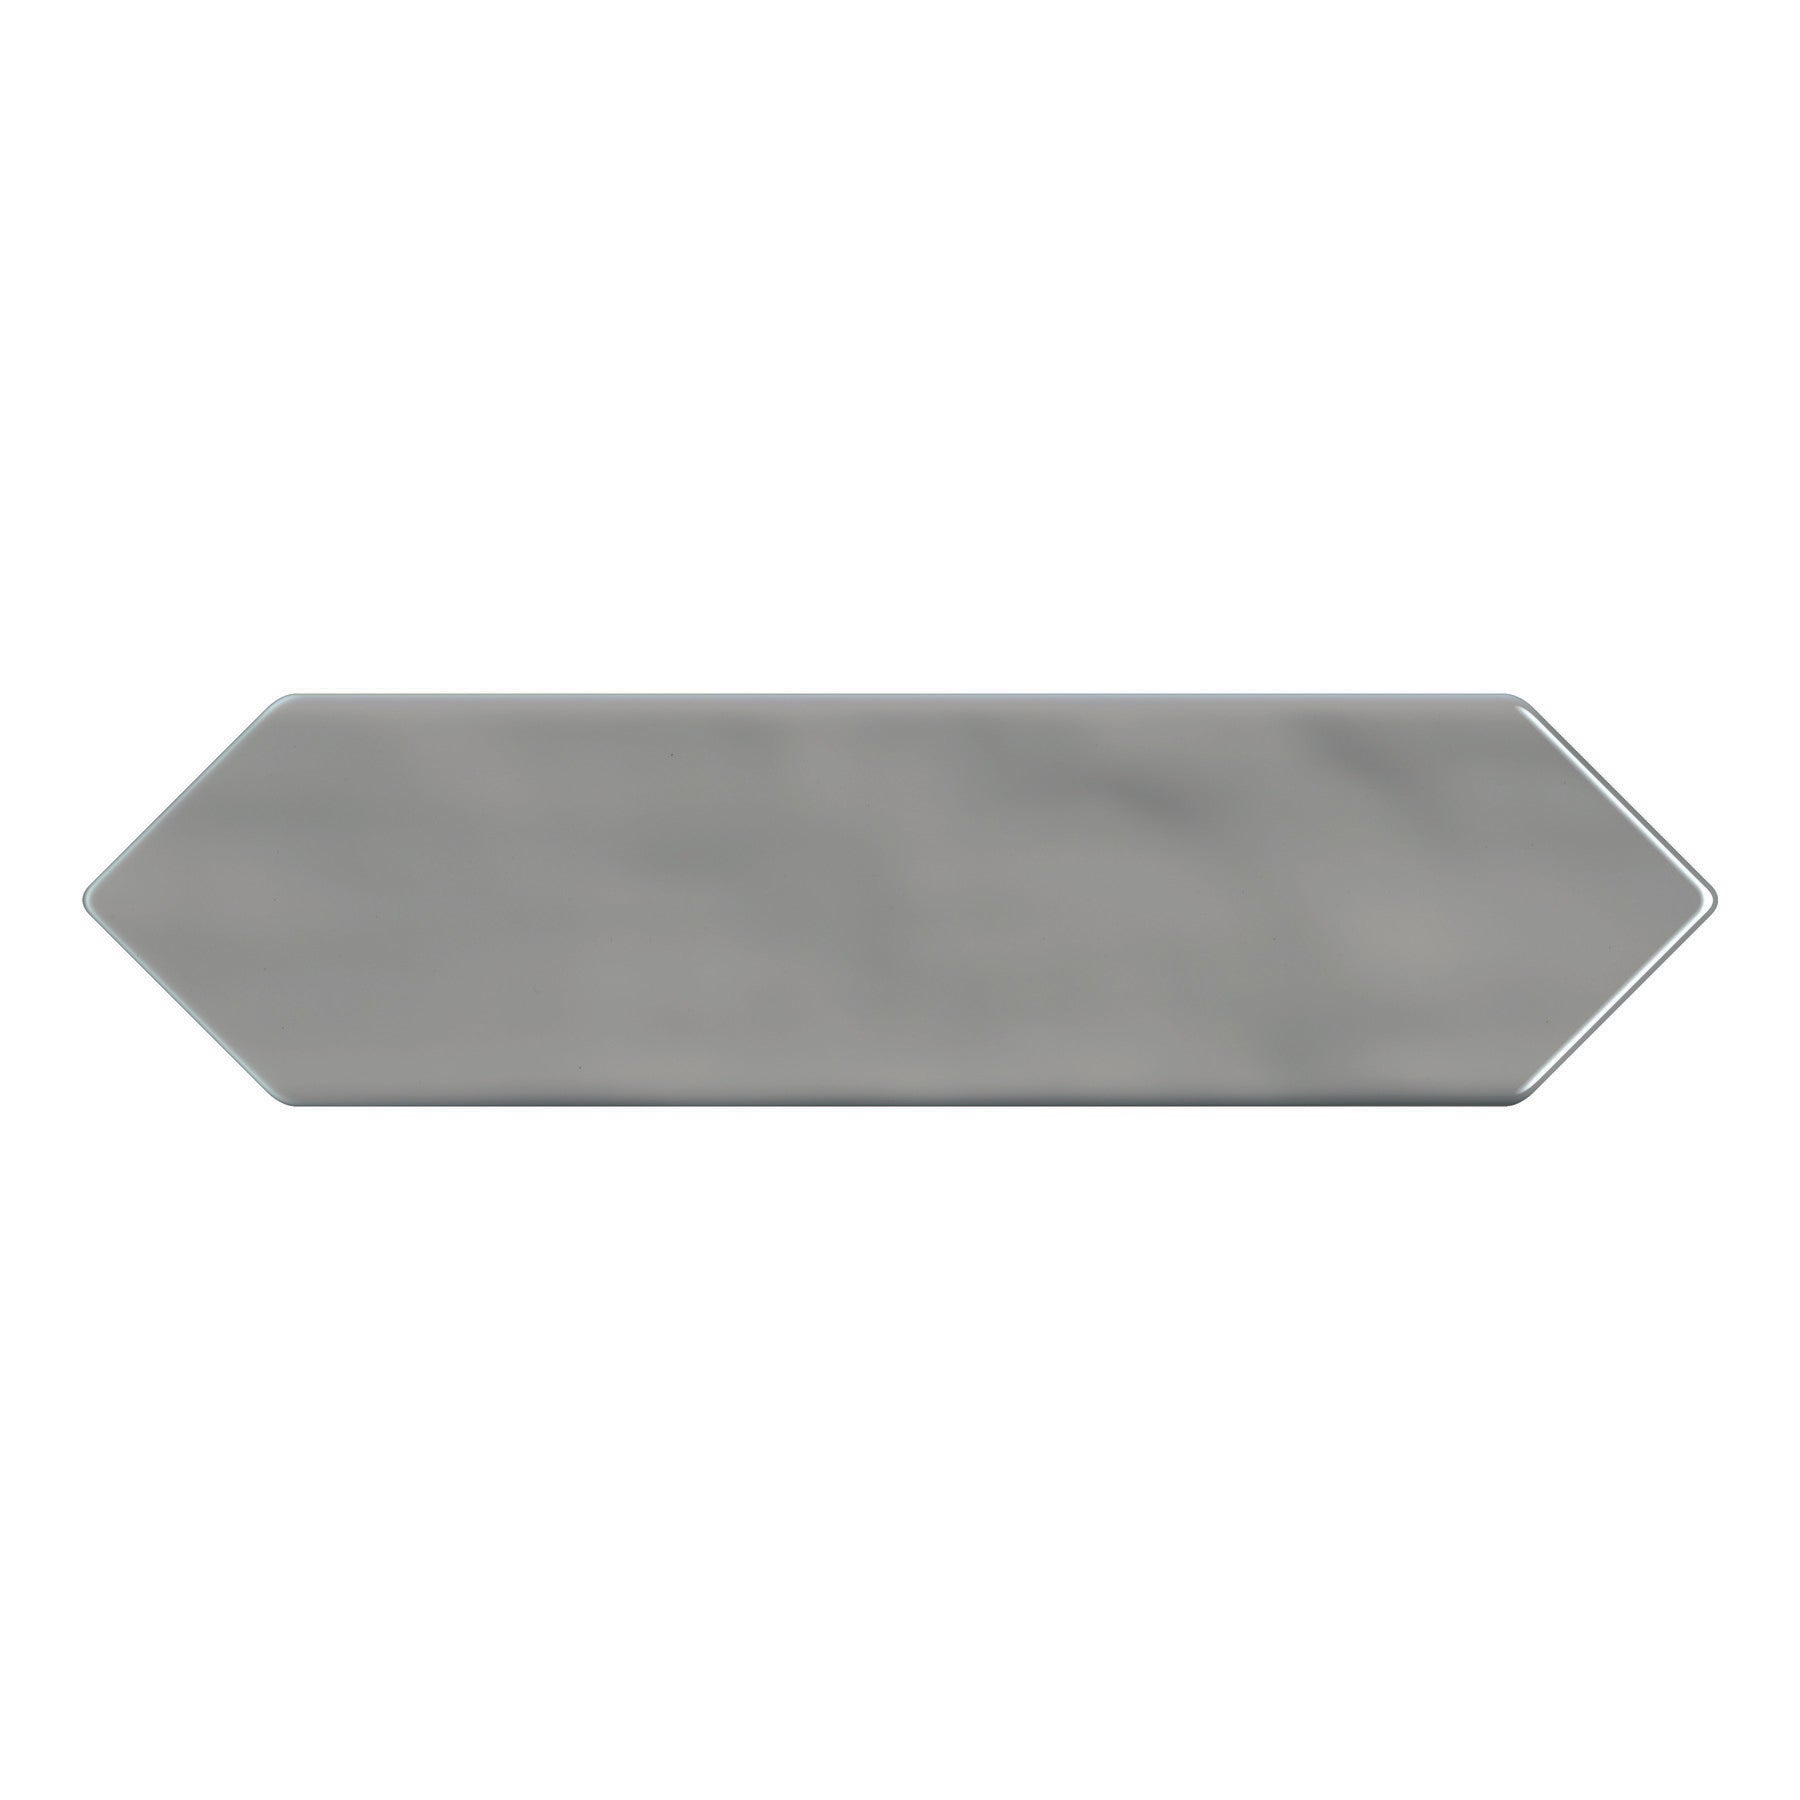 Daltile - Stagecraft - 3 in. x 12 in. Picket Wall Tile - Desert Gray X114